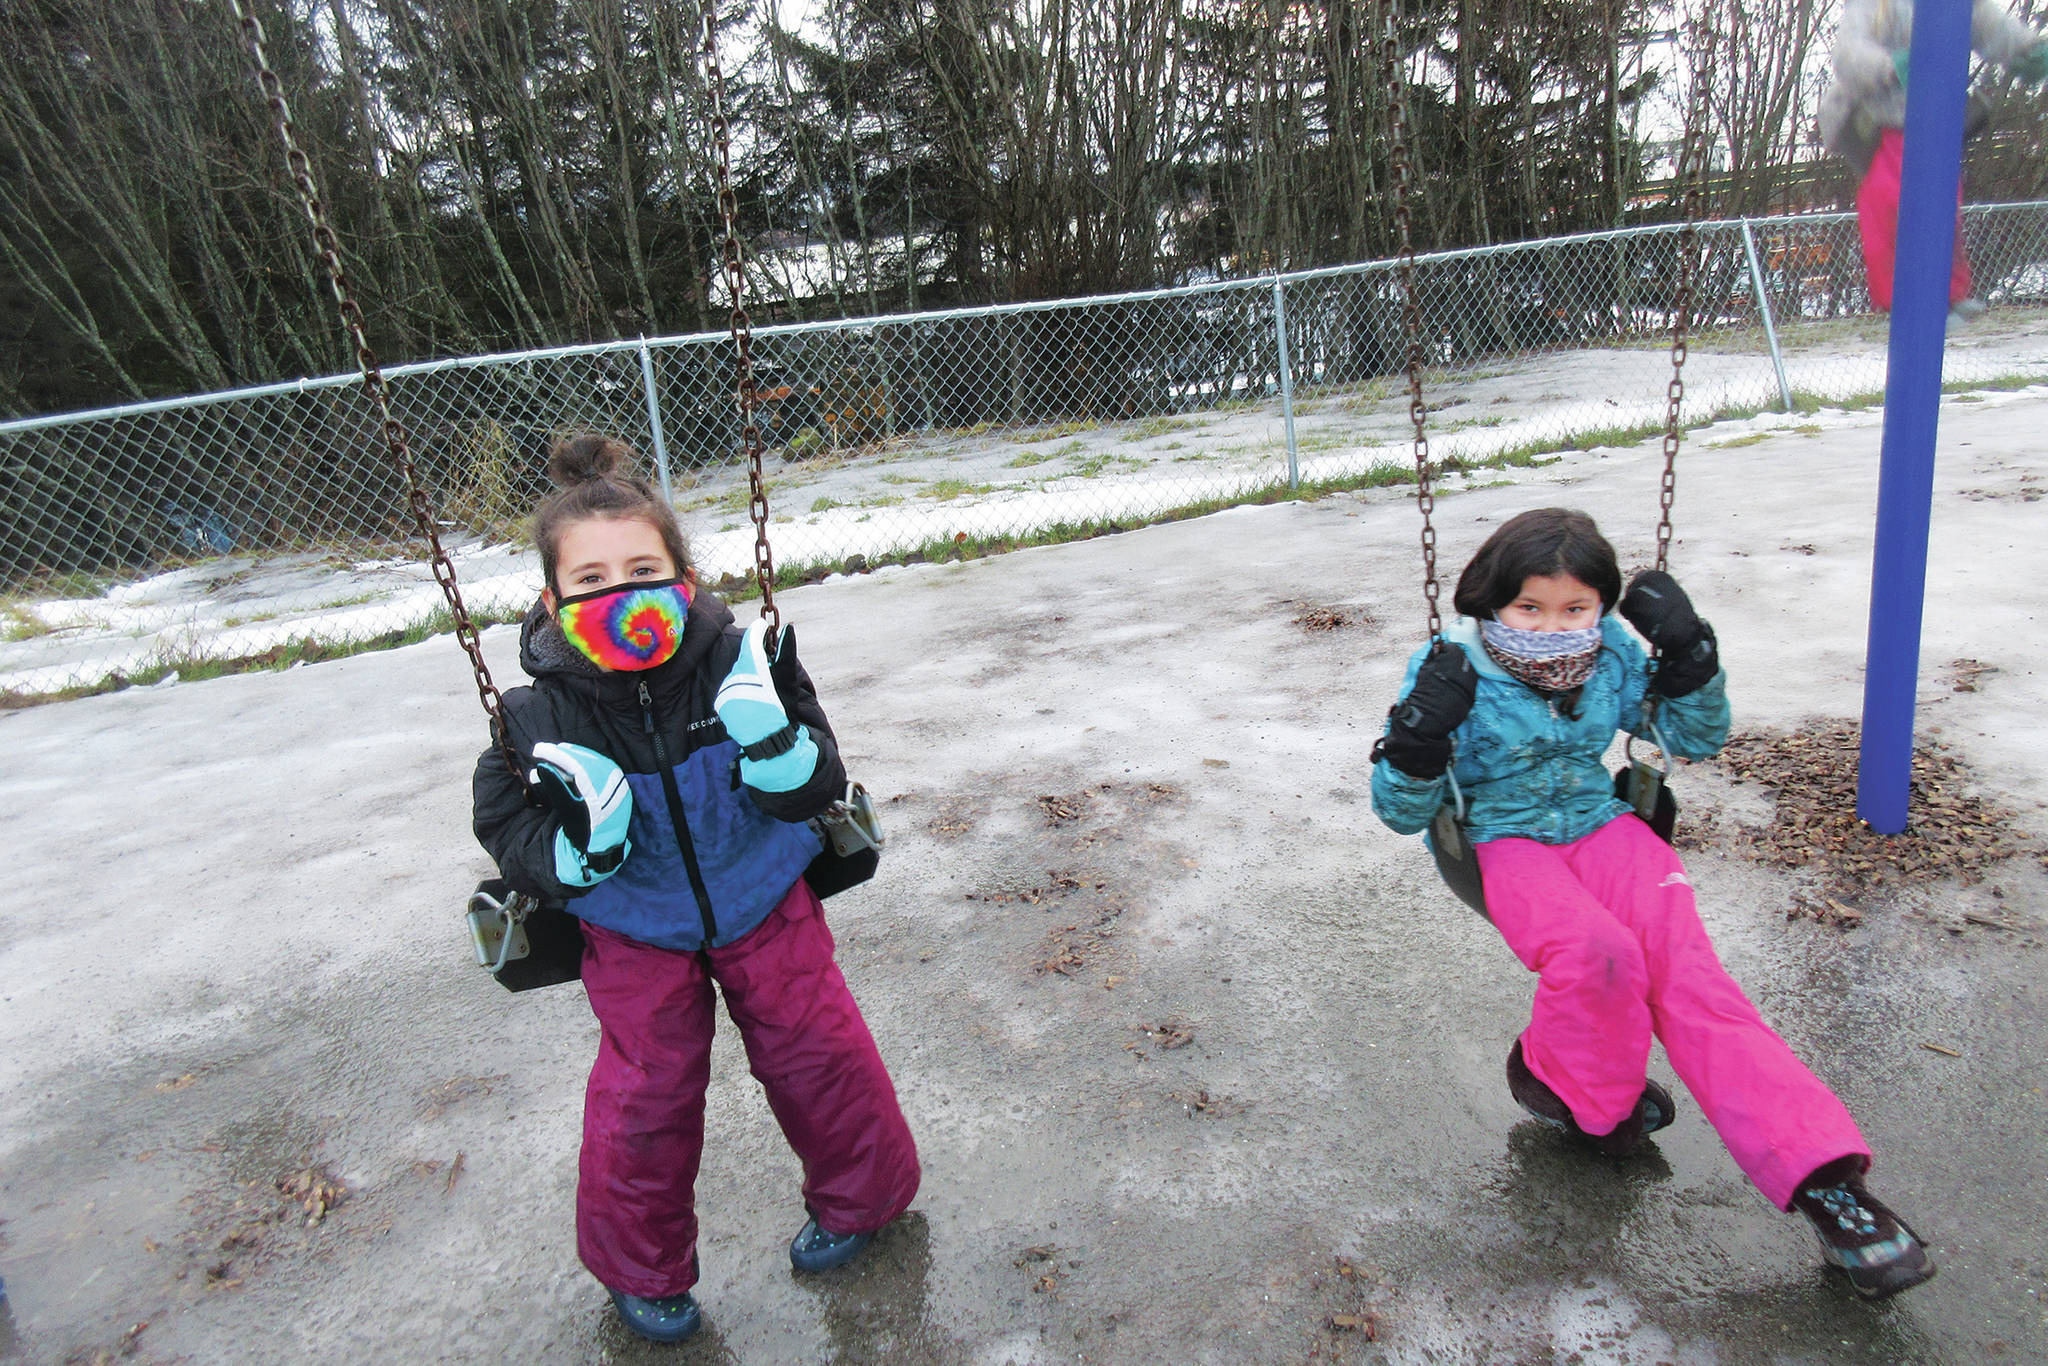 Students Sabriel Davidson and Kenadi Smith play on the swings on Monday, Jan. 11, 2021 at Fireweed Academy in Homer, Alaska. Elementary students were able to return to onsite schooling five days a week starting Monday. (Photo courtesy Todd Hindman/Fireweed Academy)